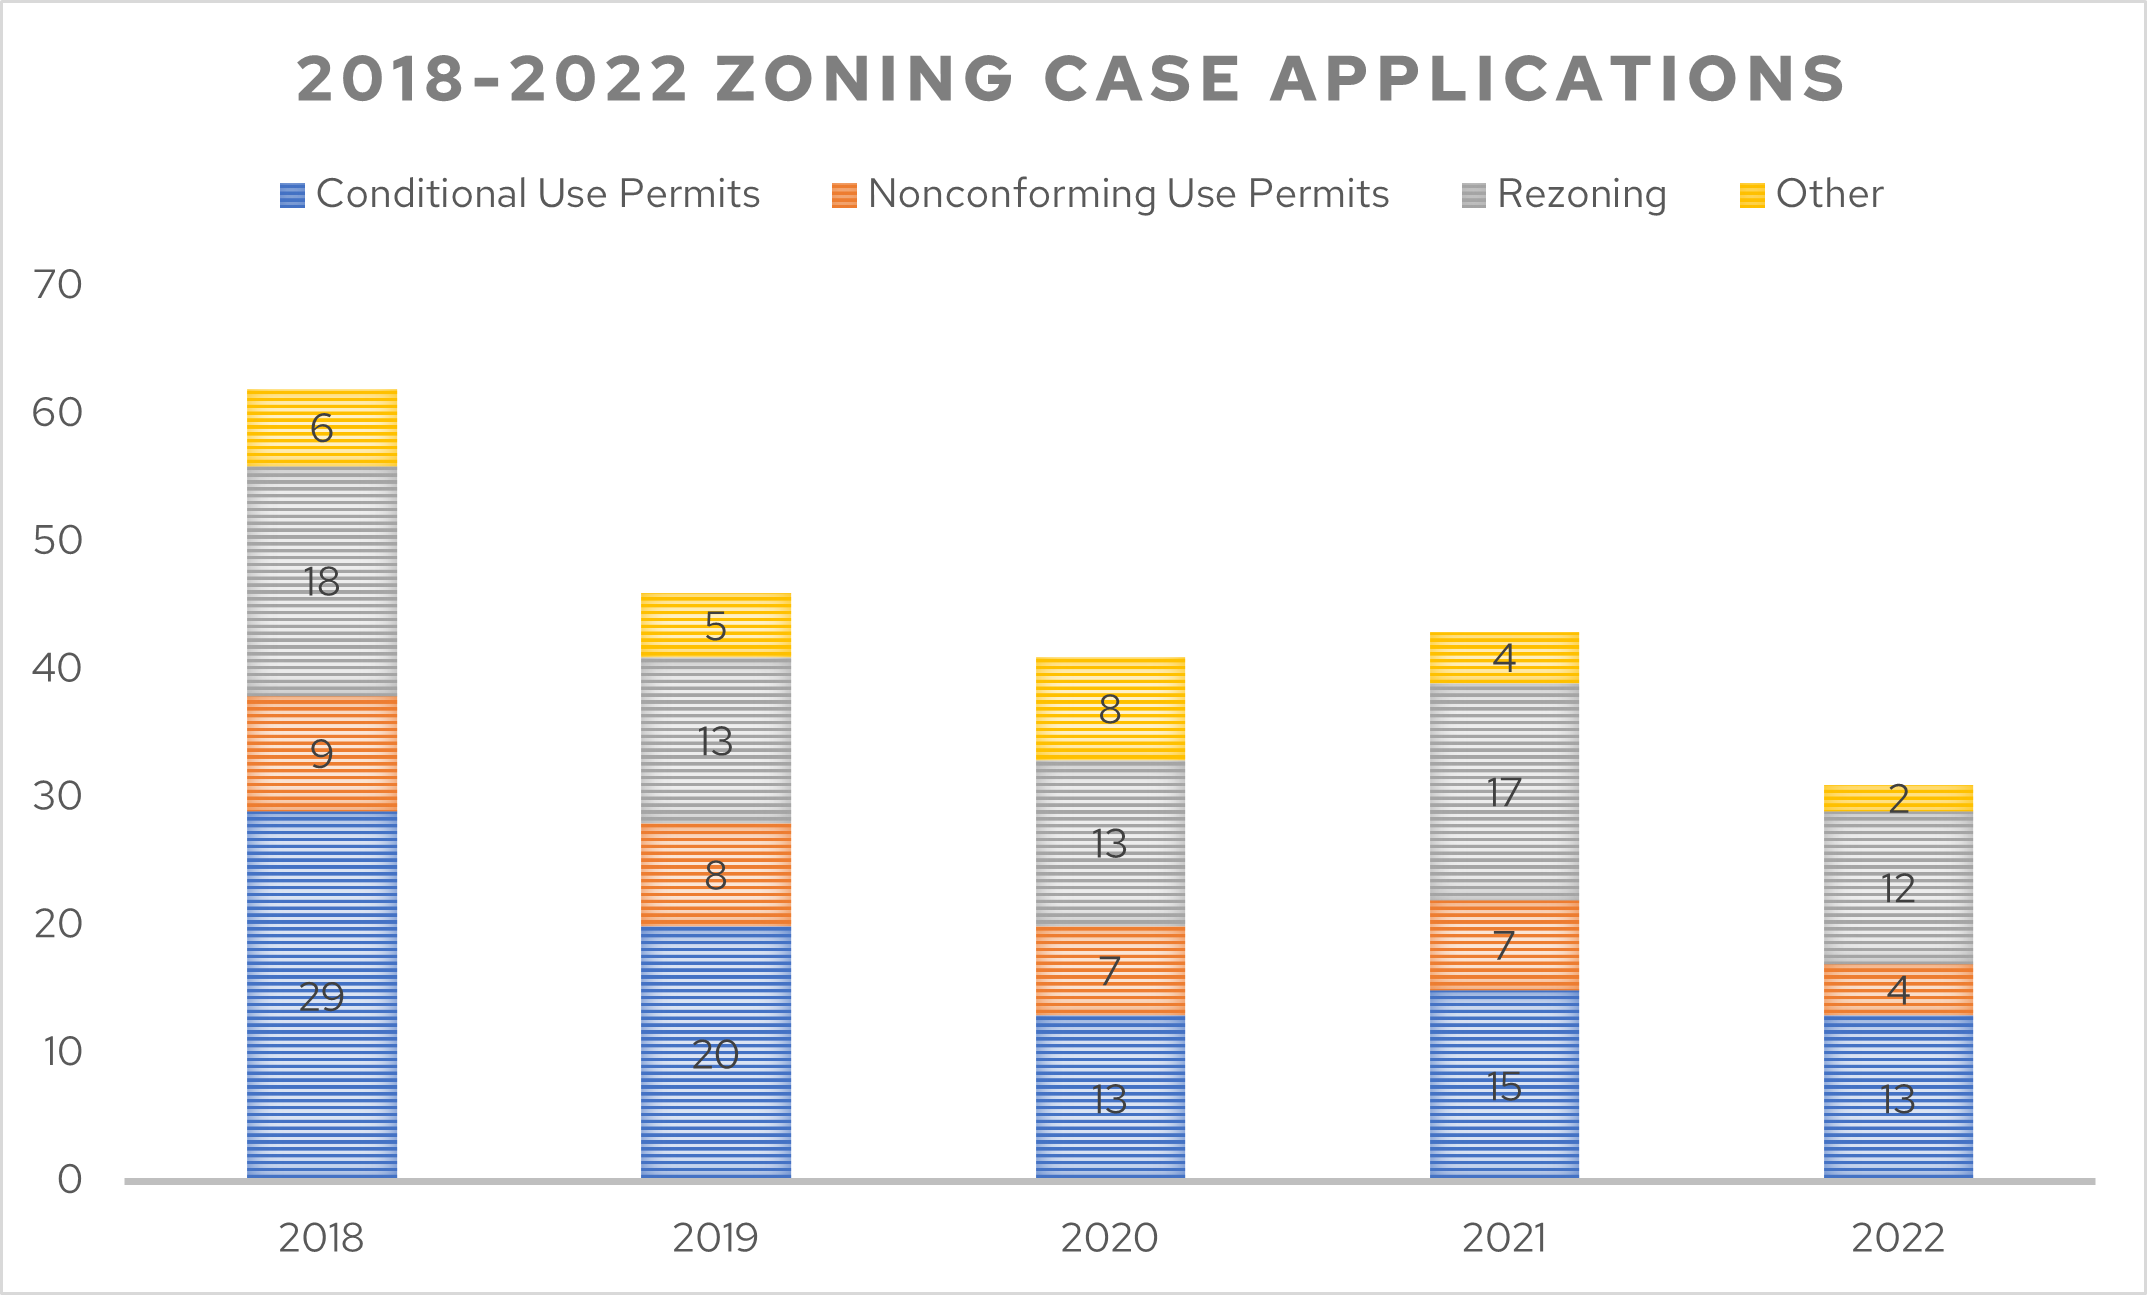 Figure 1: Zoning Case Applications, 2018 - 2022